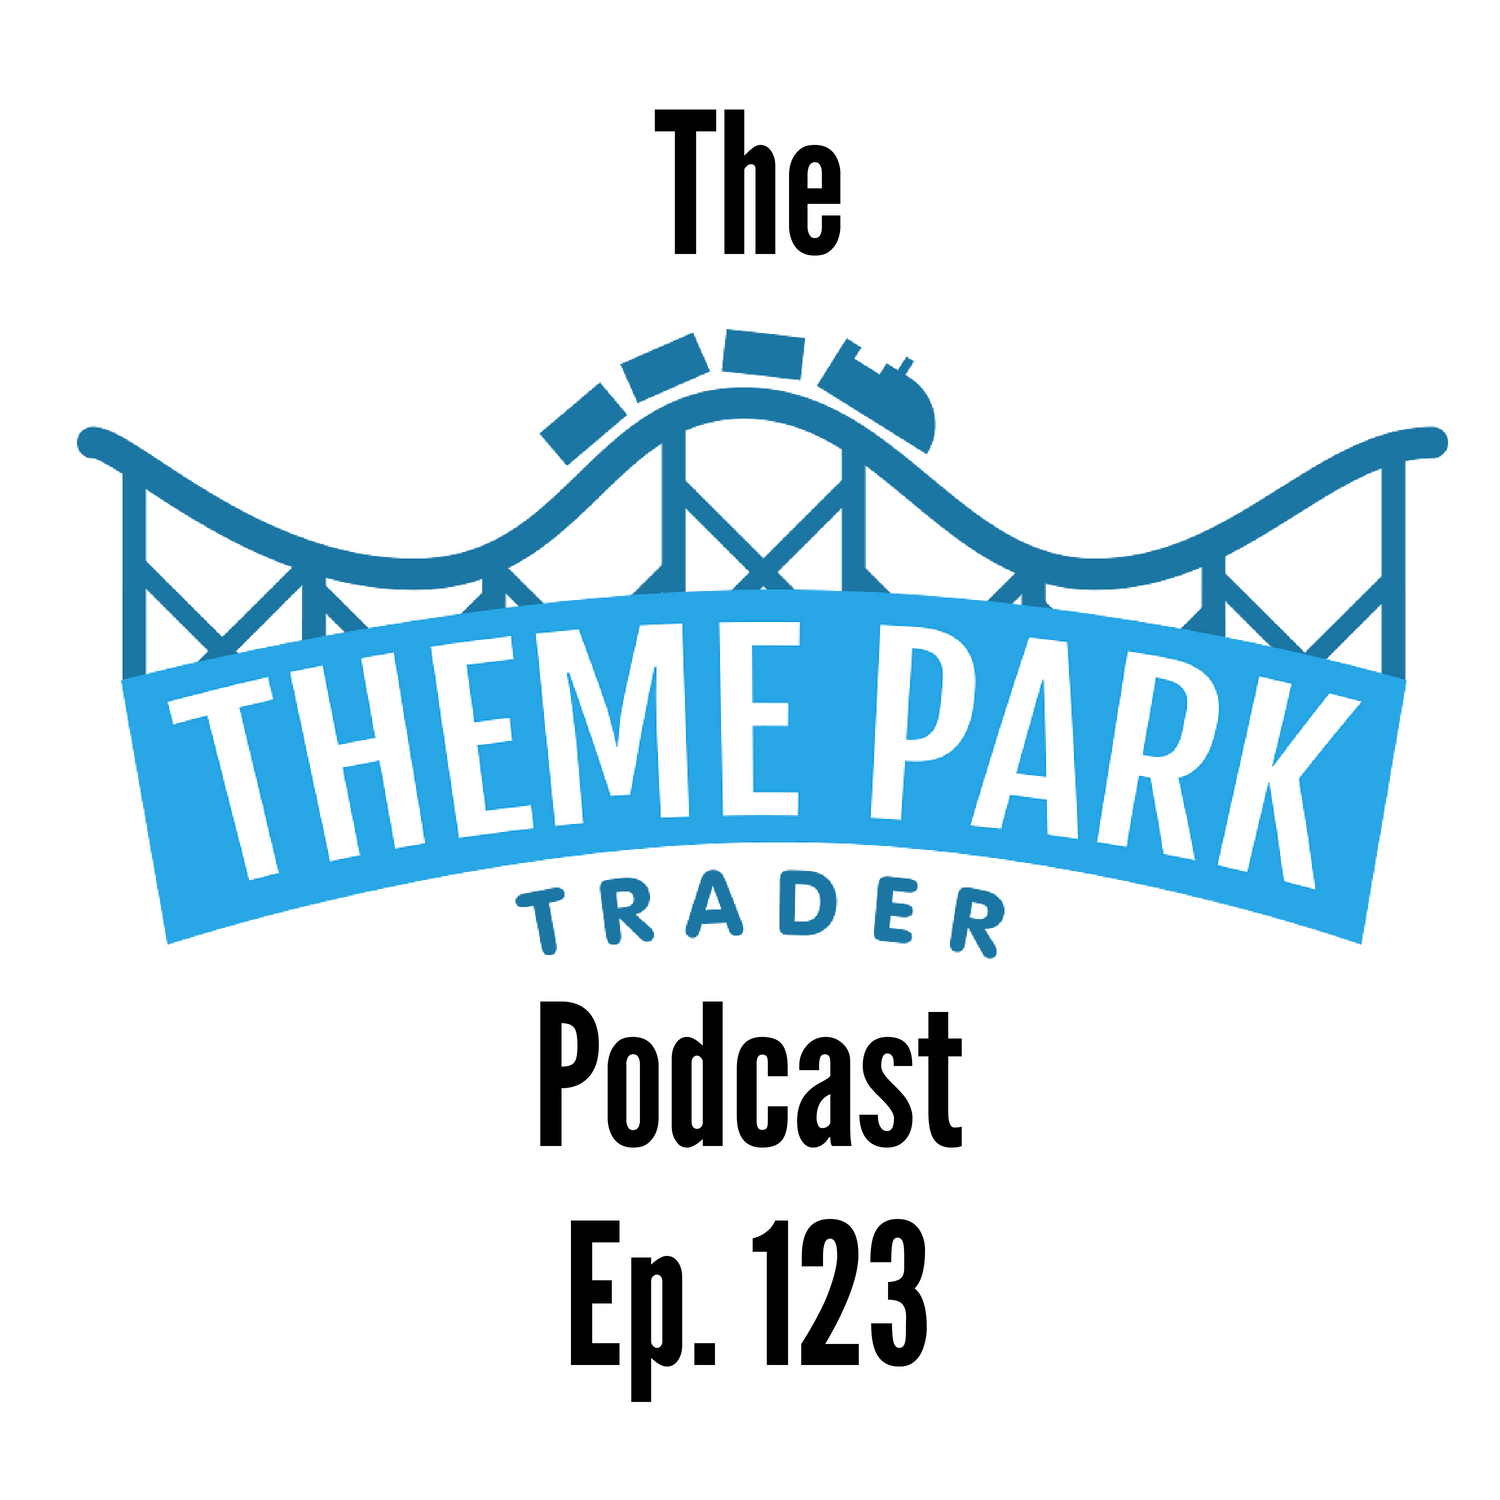 Episode 123 - Charlie & Ed Join Us To Chat About Walt Disney World Trips!